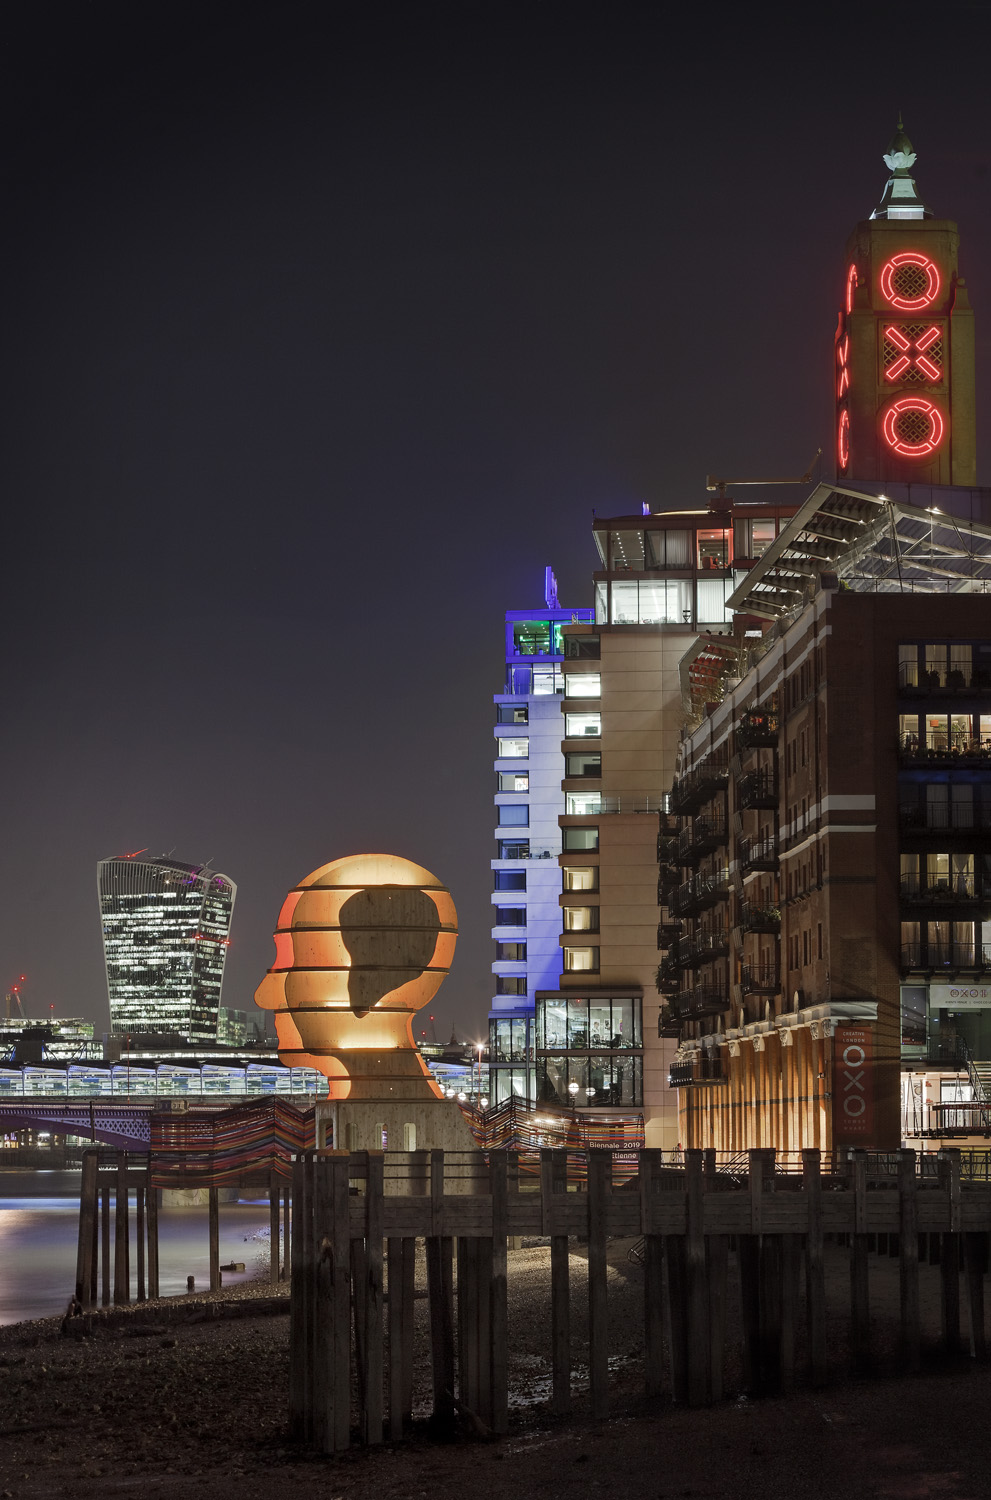  Light sculpture, "Head Above Water" by Steuart Padwick on the Oxo Tower pier, South Bank, London. Interactive lighting installation by Hoare Lea Lighting. The sculpture supports Time to Change's campaign to remove the stigma of mental illness. 